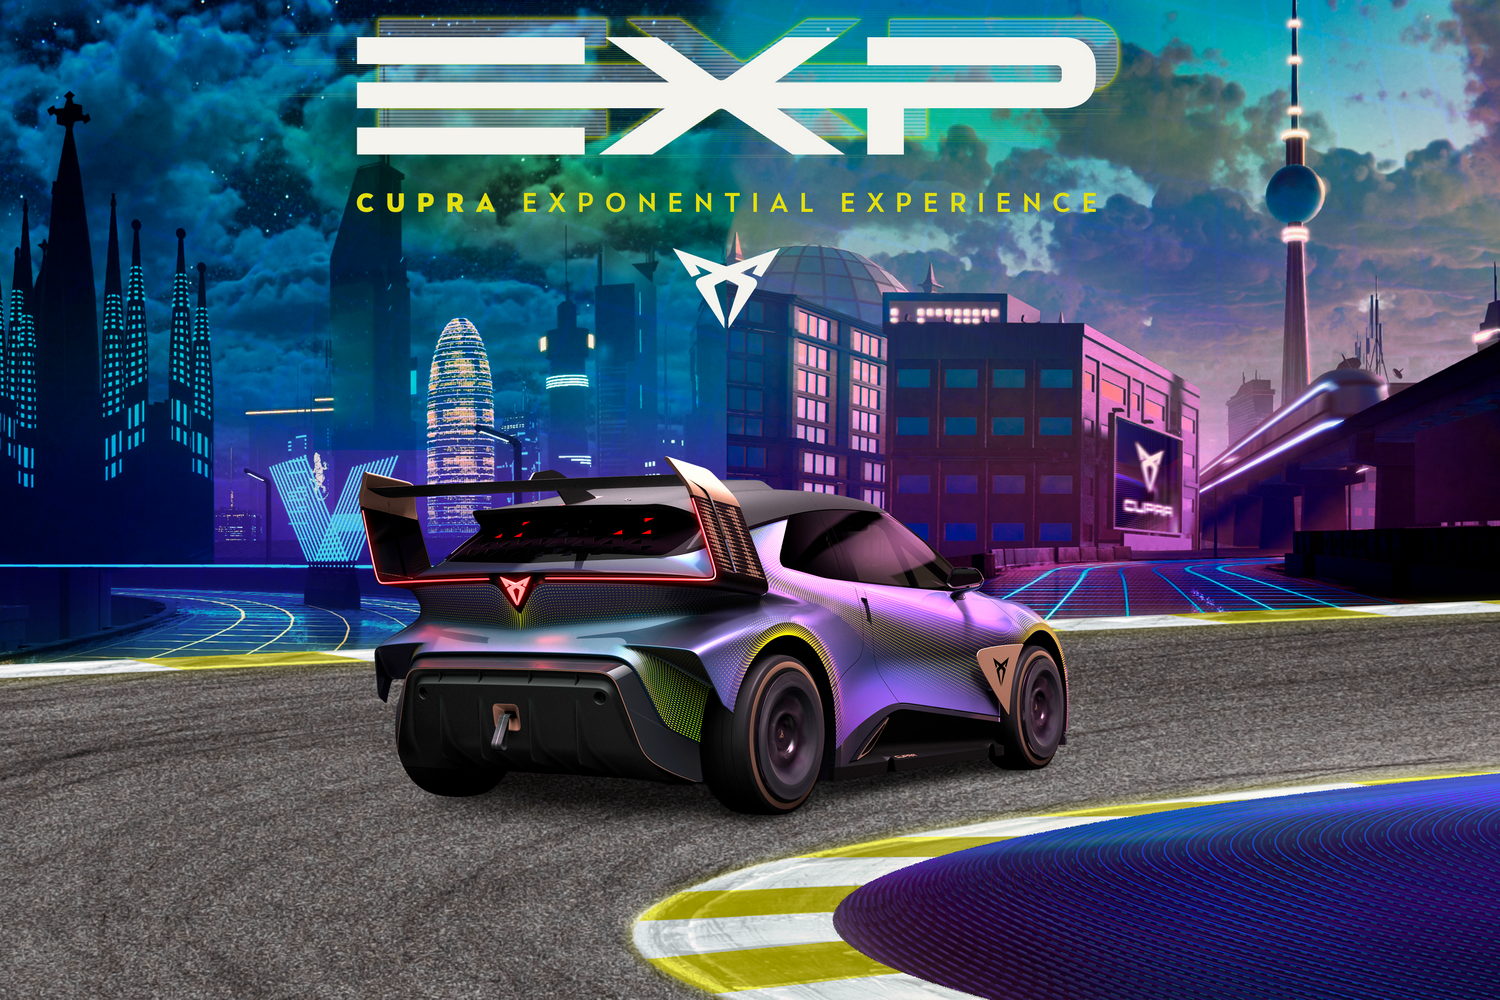 Car News | Cupra merges real life and video games | CompleteCar.ie